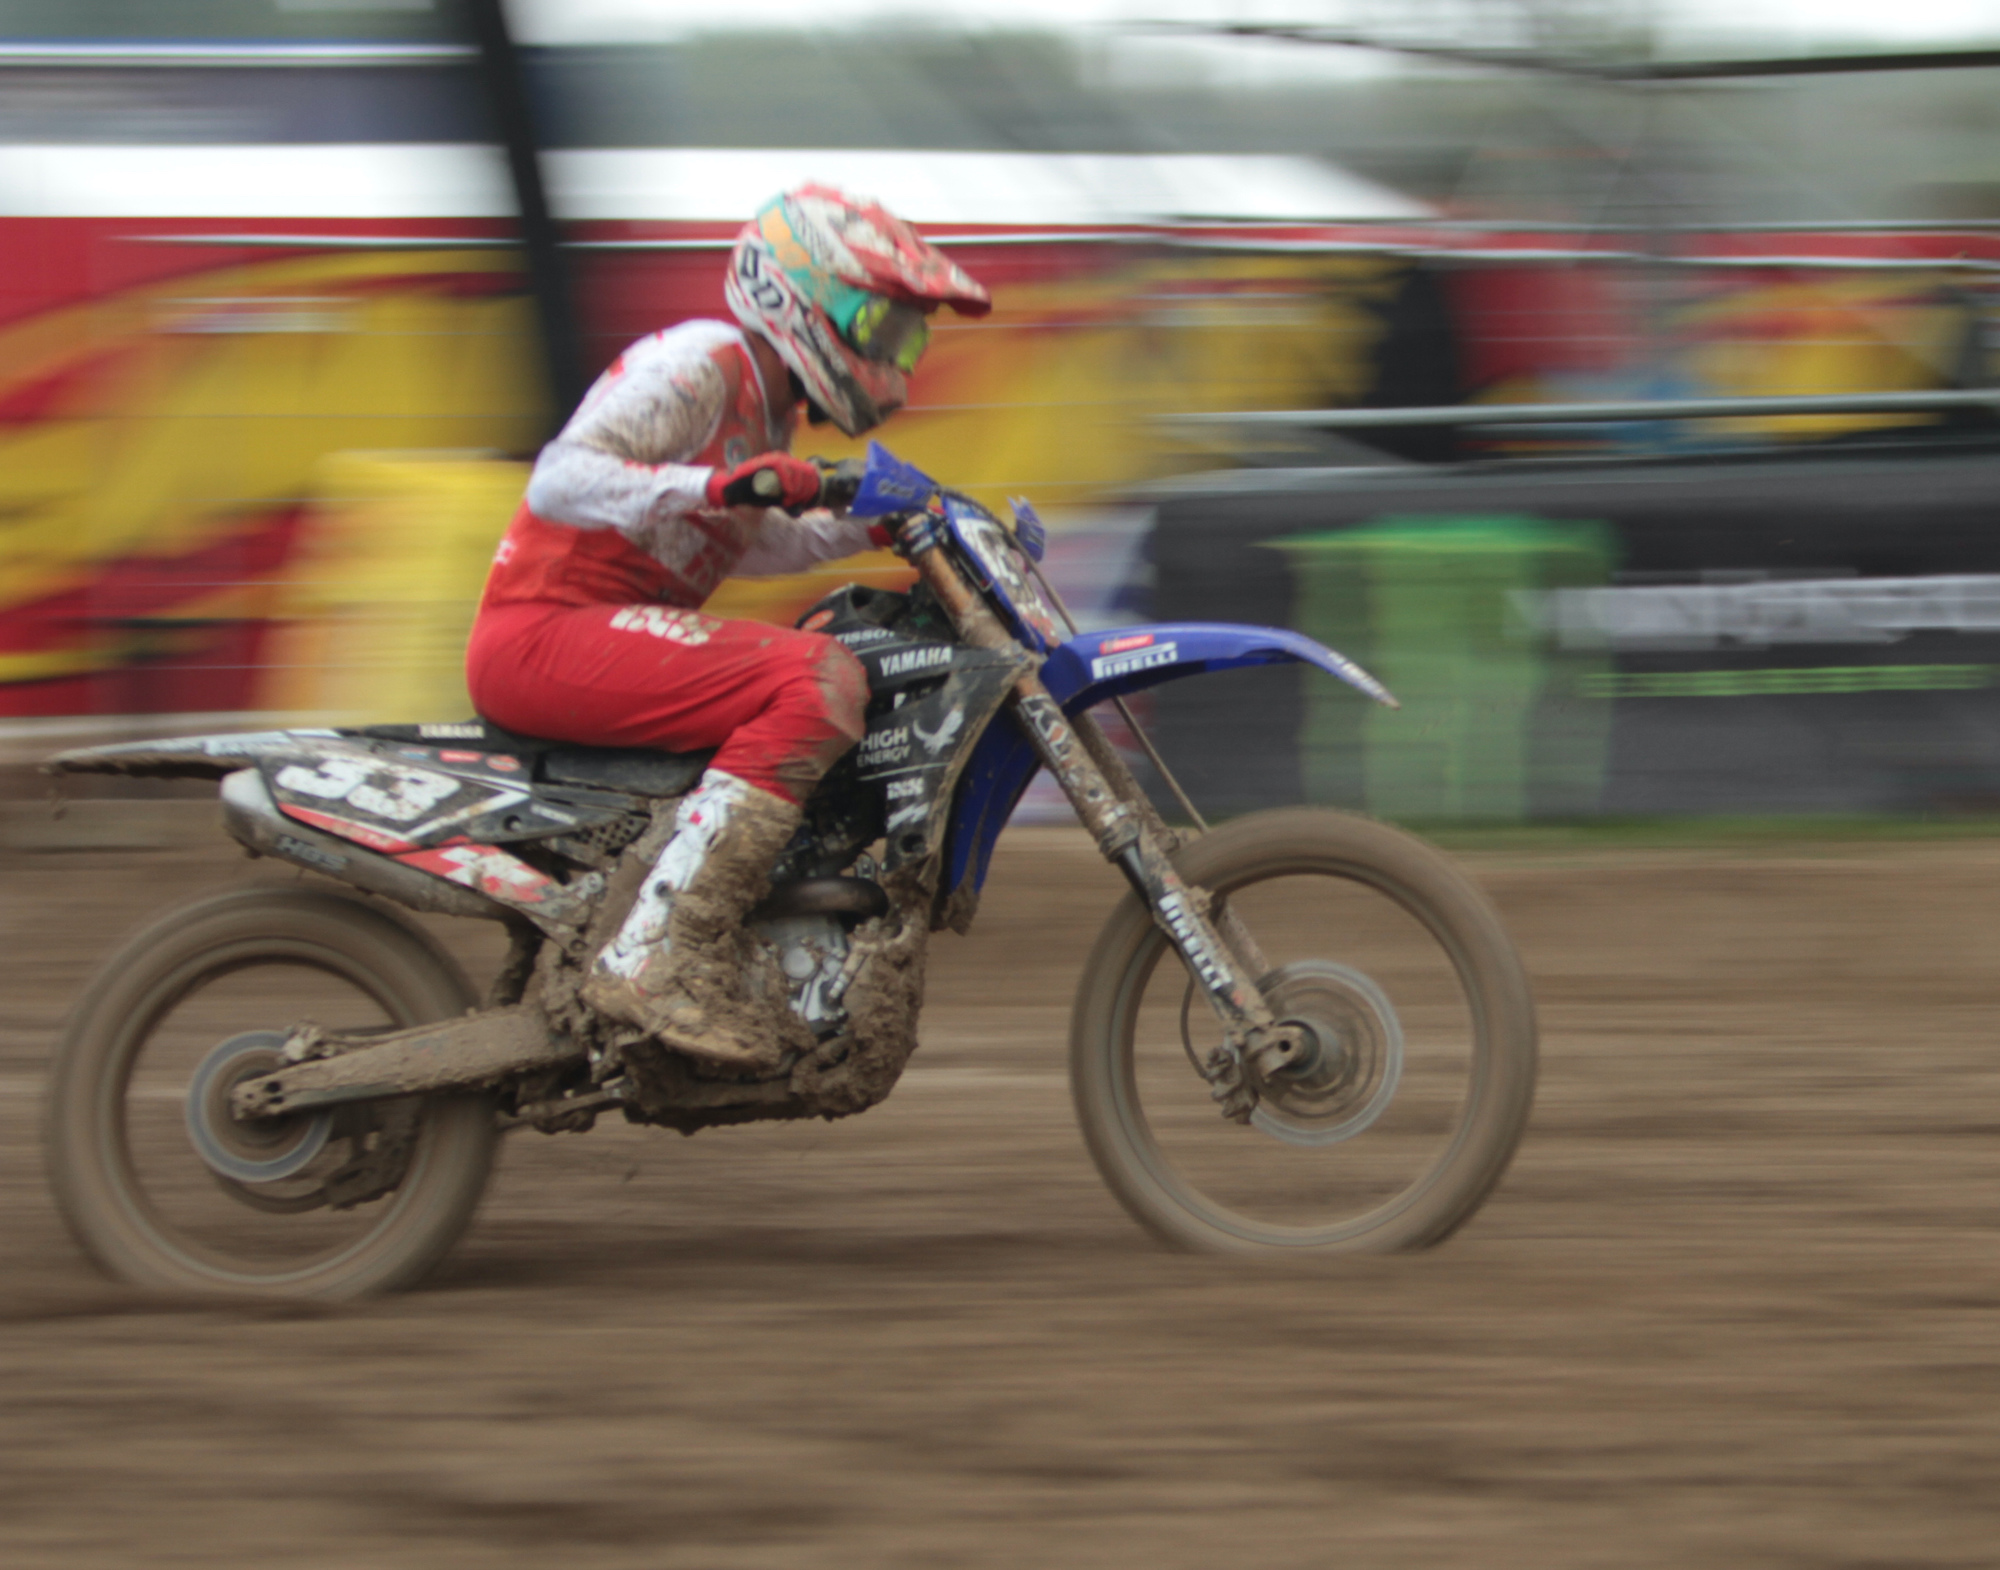 a dirt bike racing in action